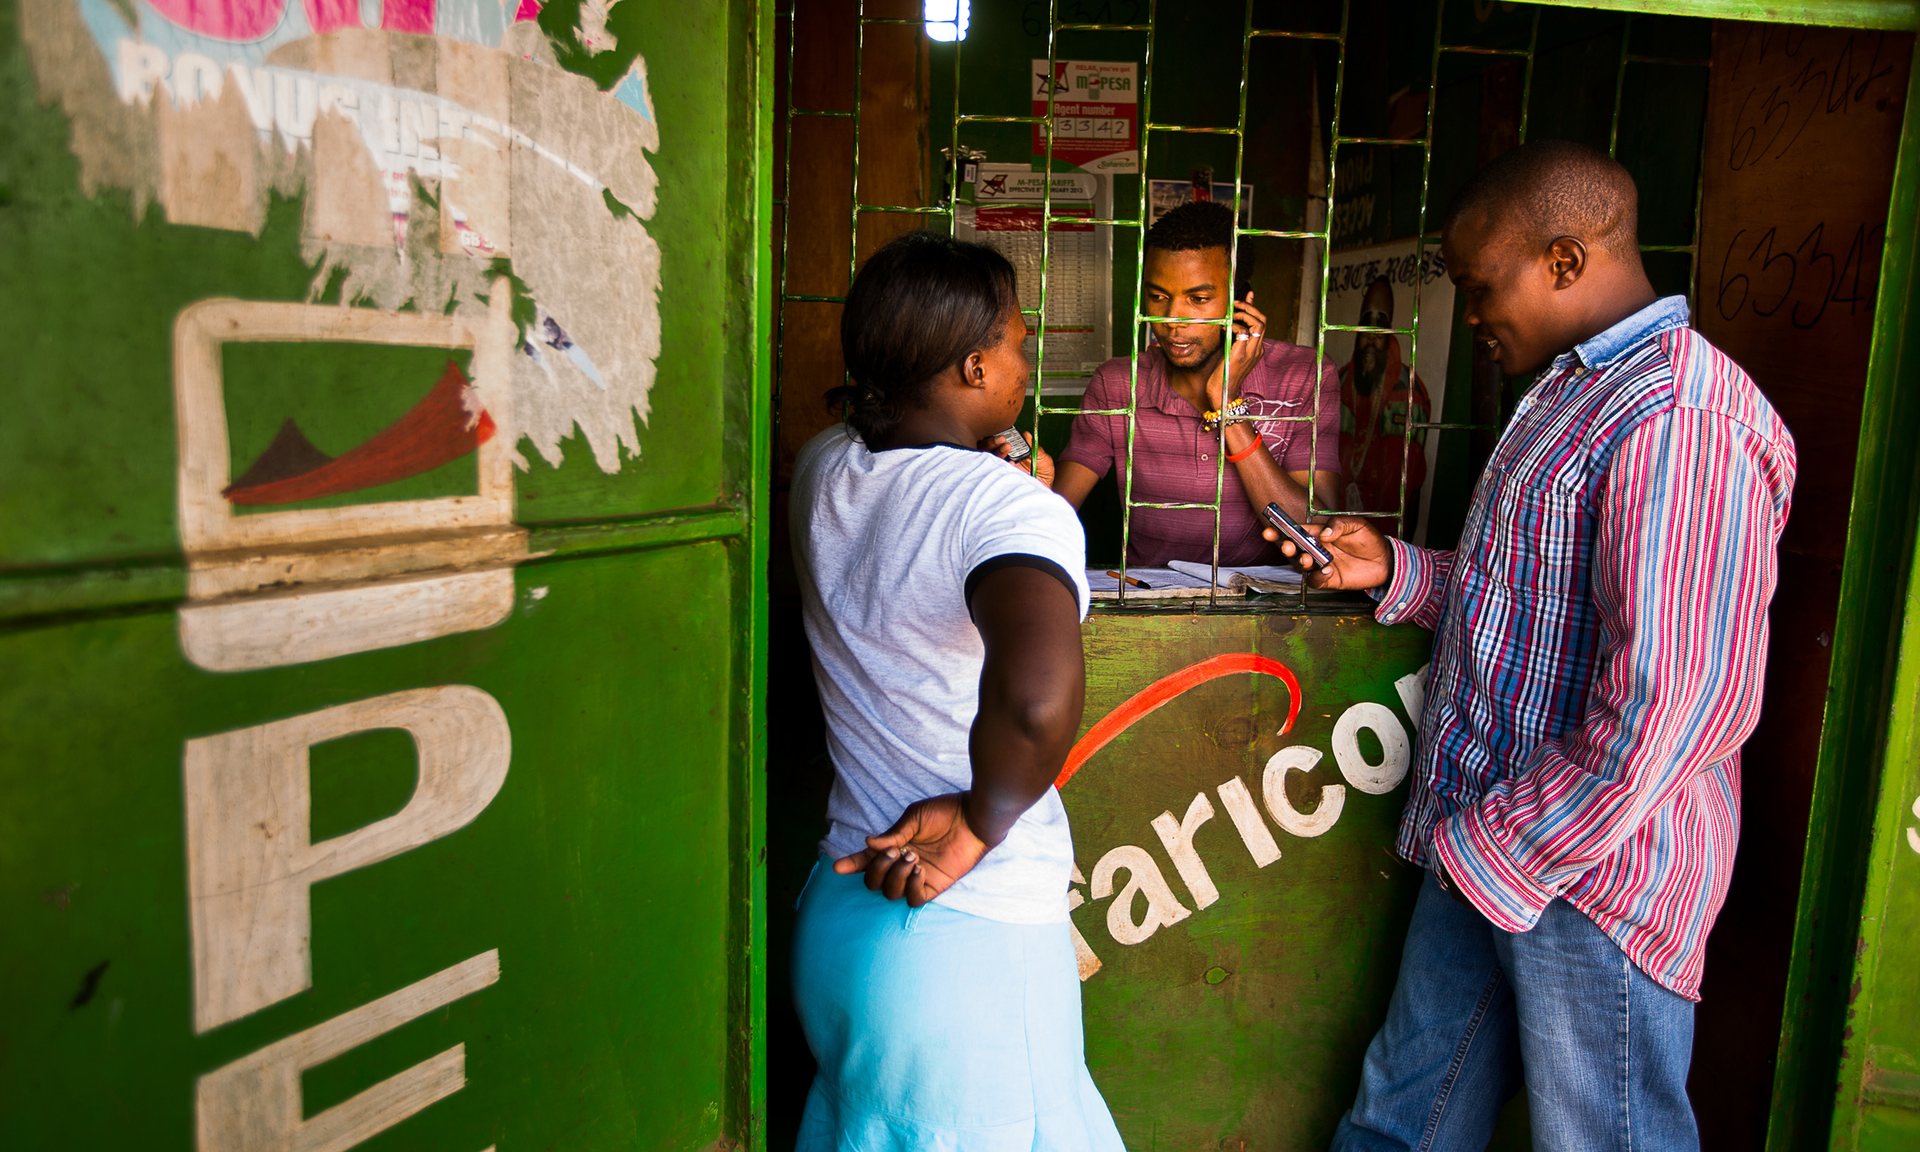 People transfer money using the M-Pesa mobile banking service at a store in Nairobi, Kenya, in 2013. Photograph: Bloomberg via Getty Images